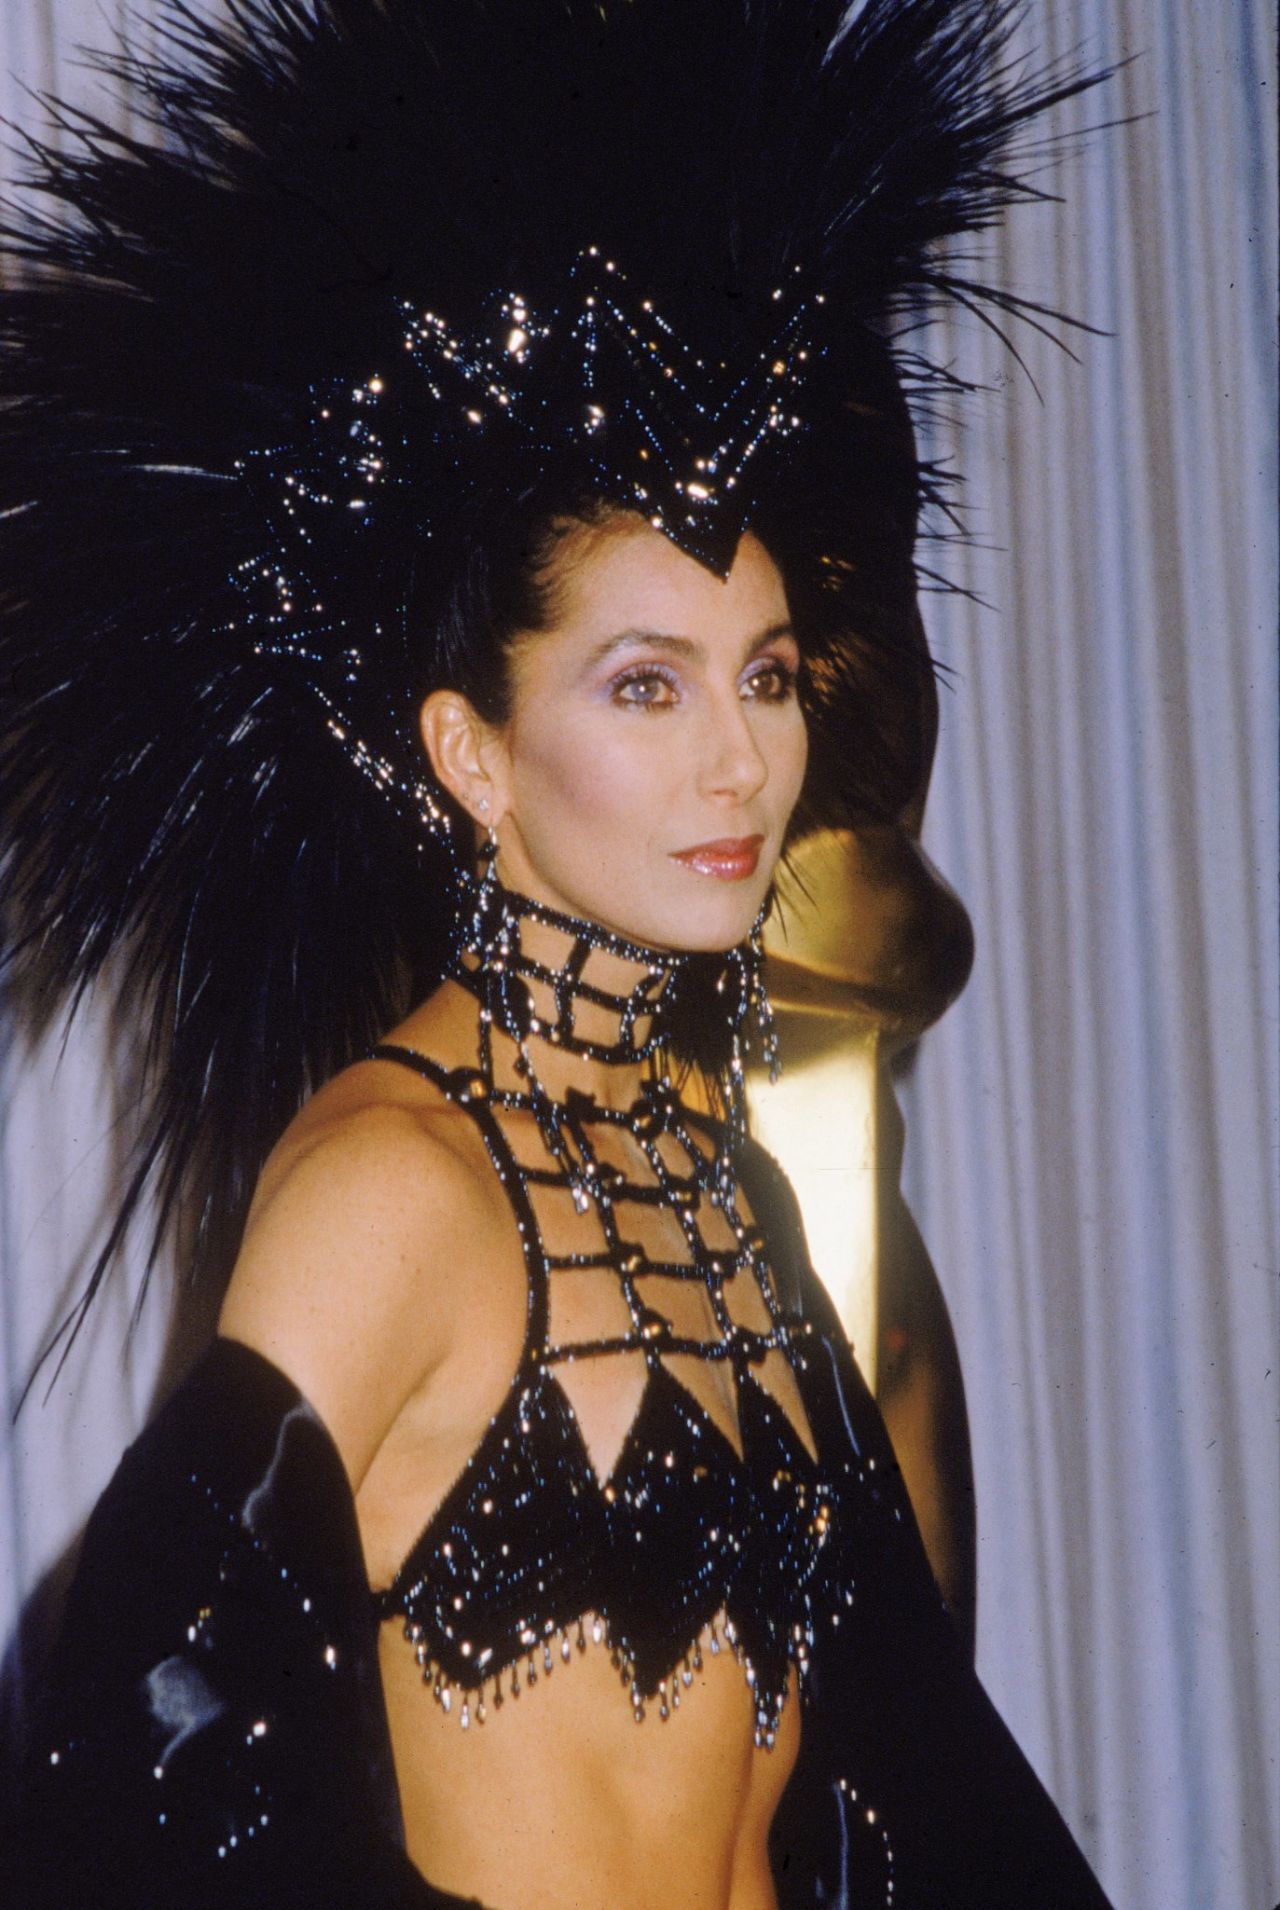 Cher channeled her inner showgirl at the 1986 Academy Awards, showing up in this sequined and feathered ensemble.